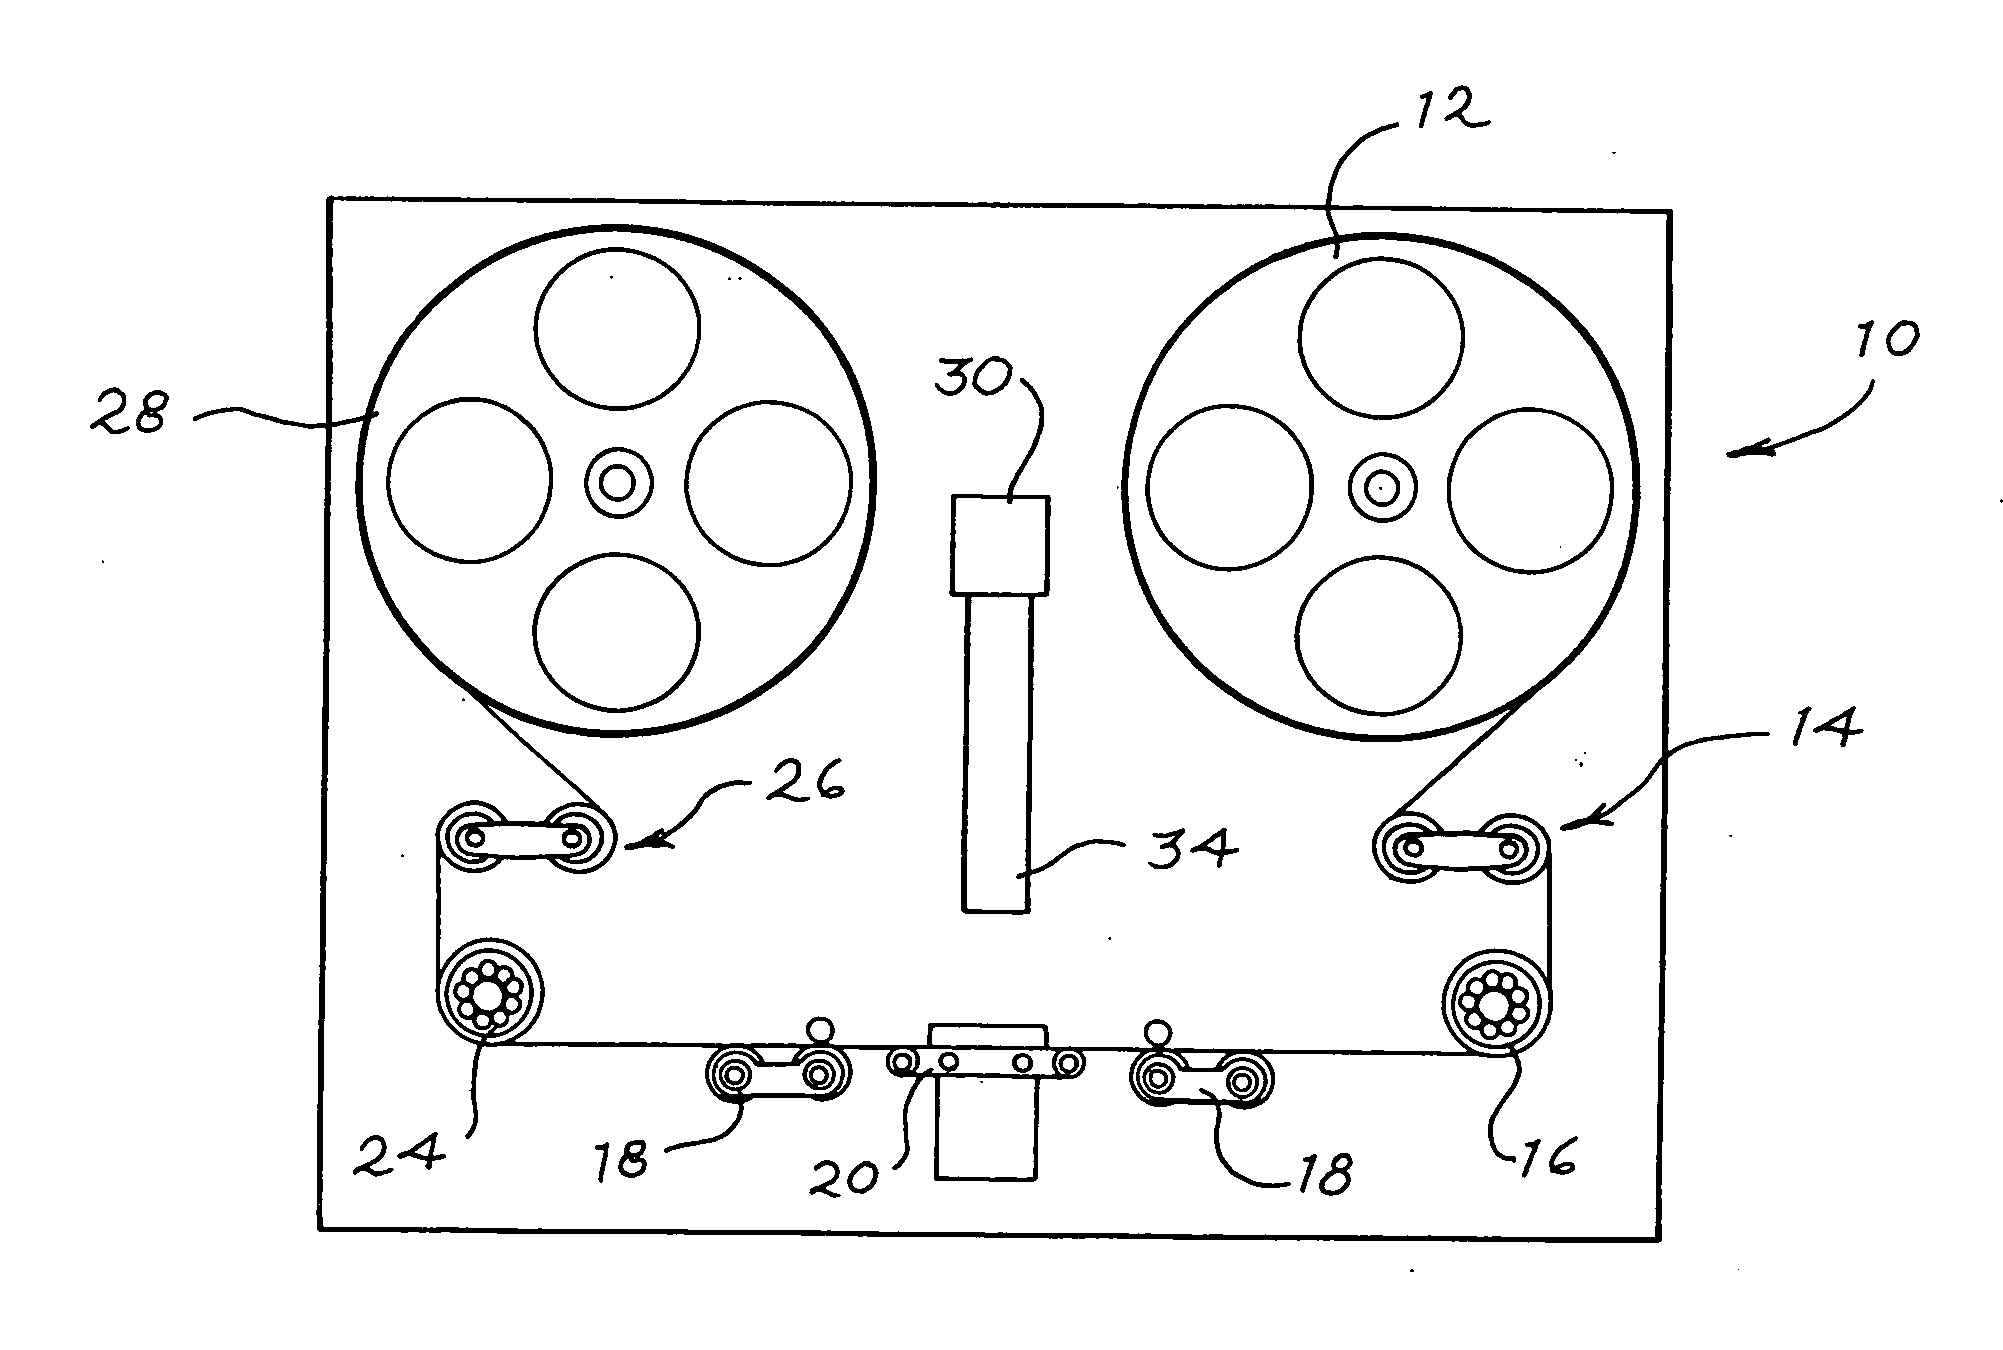 Method and apparatus for continuous motion film scanning